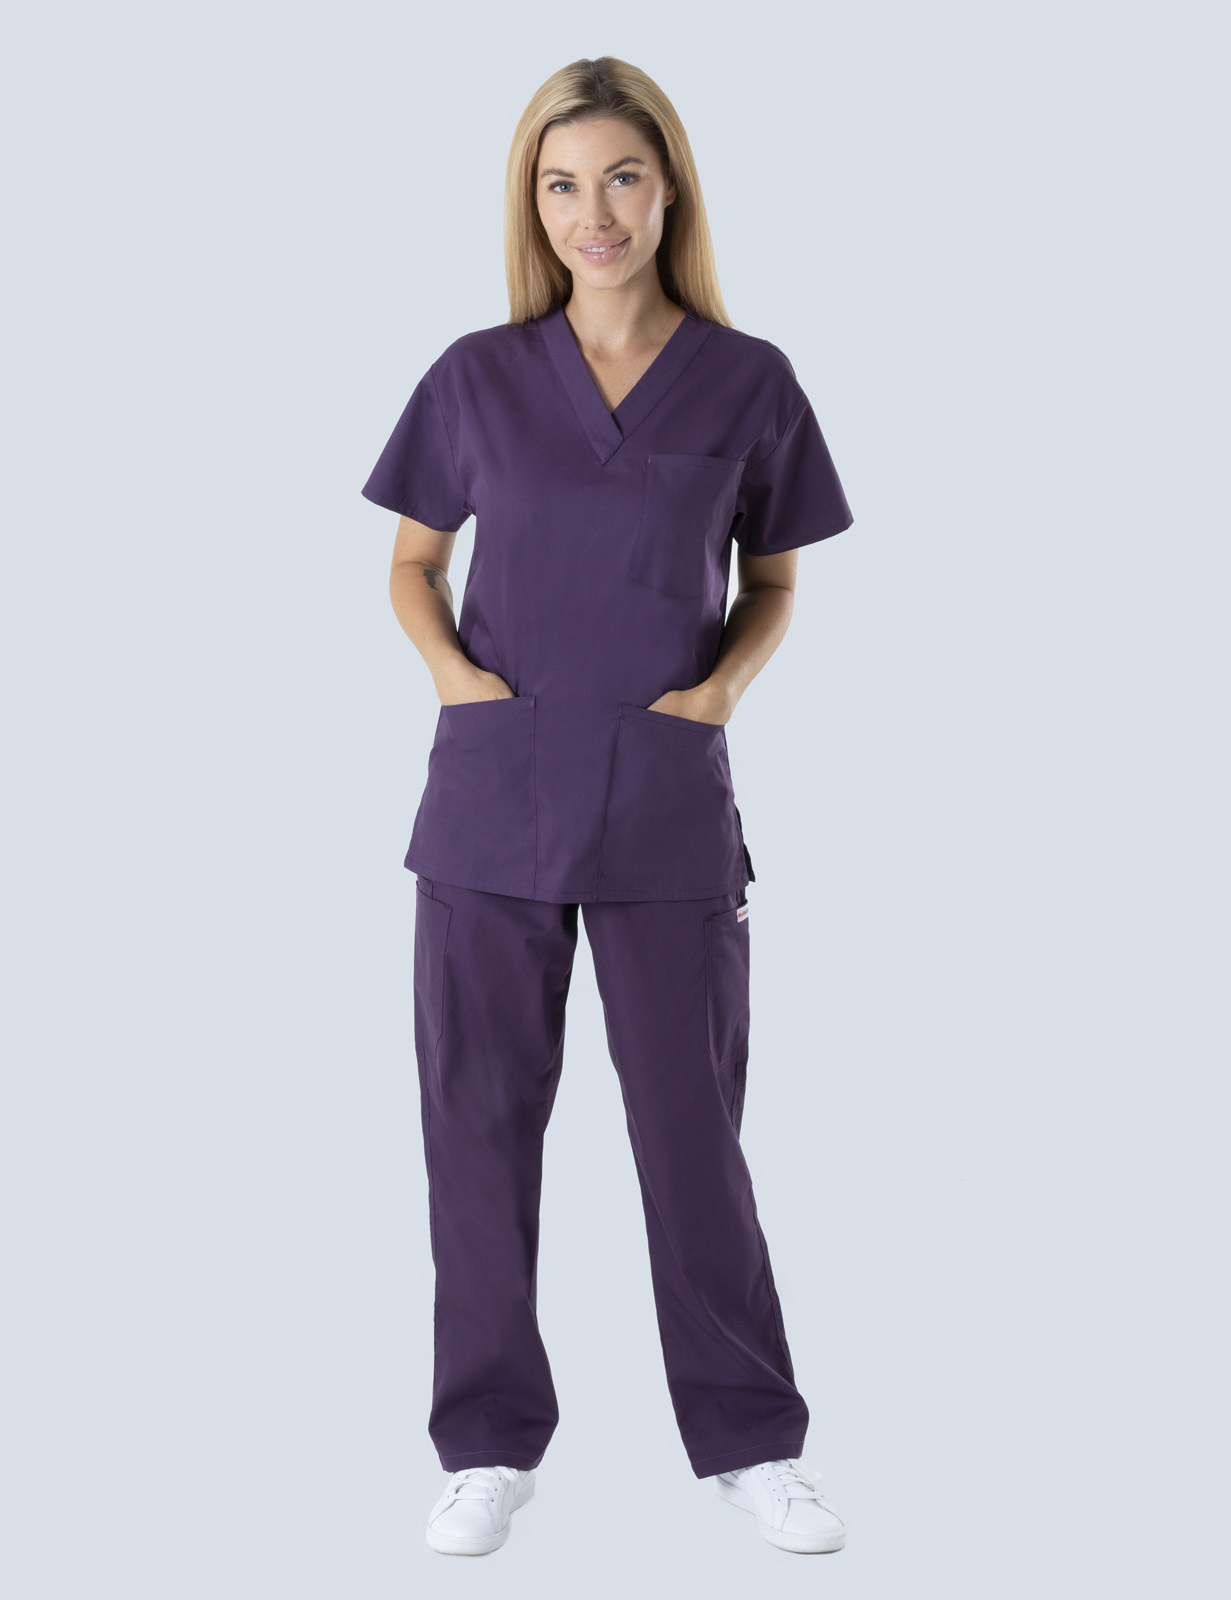 Gympie Hospital - Midwife (4 Pocket Scrub Top and Cargo Pants in Aubergine incl Logos)